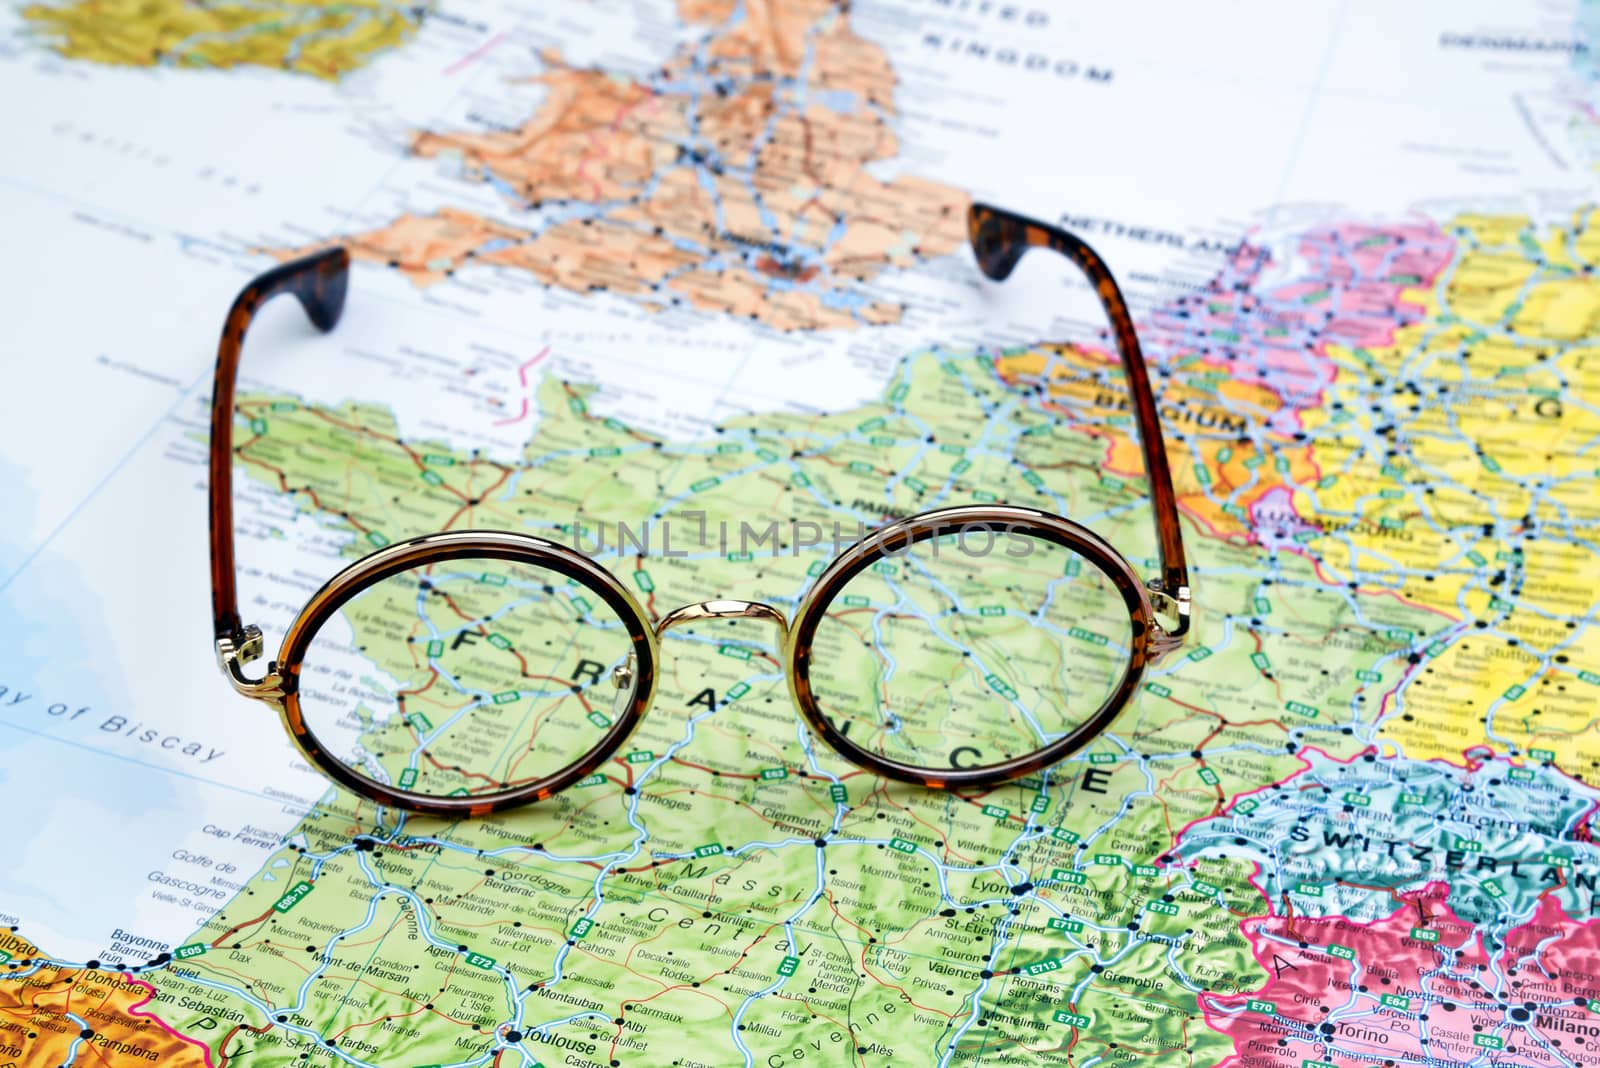 Glasses on a map of europe - France by dk_photos